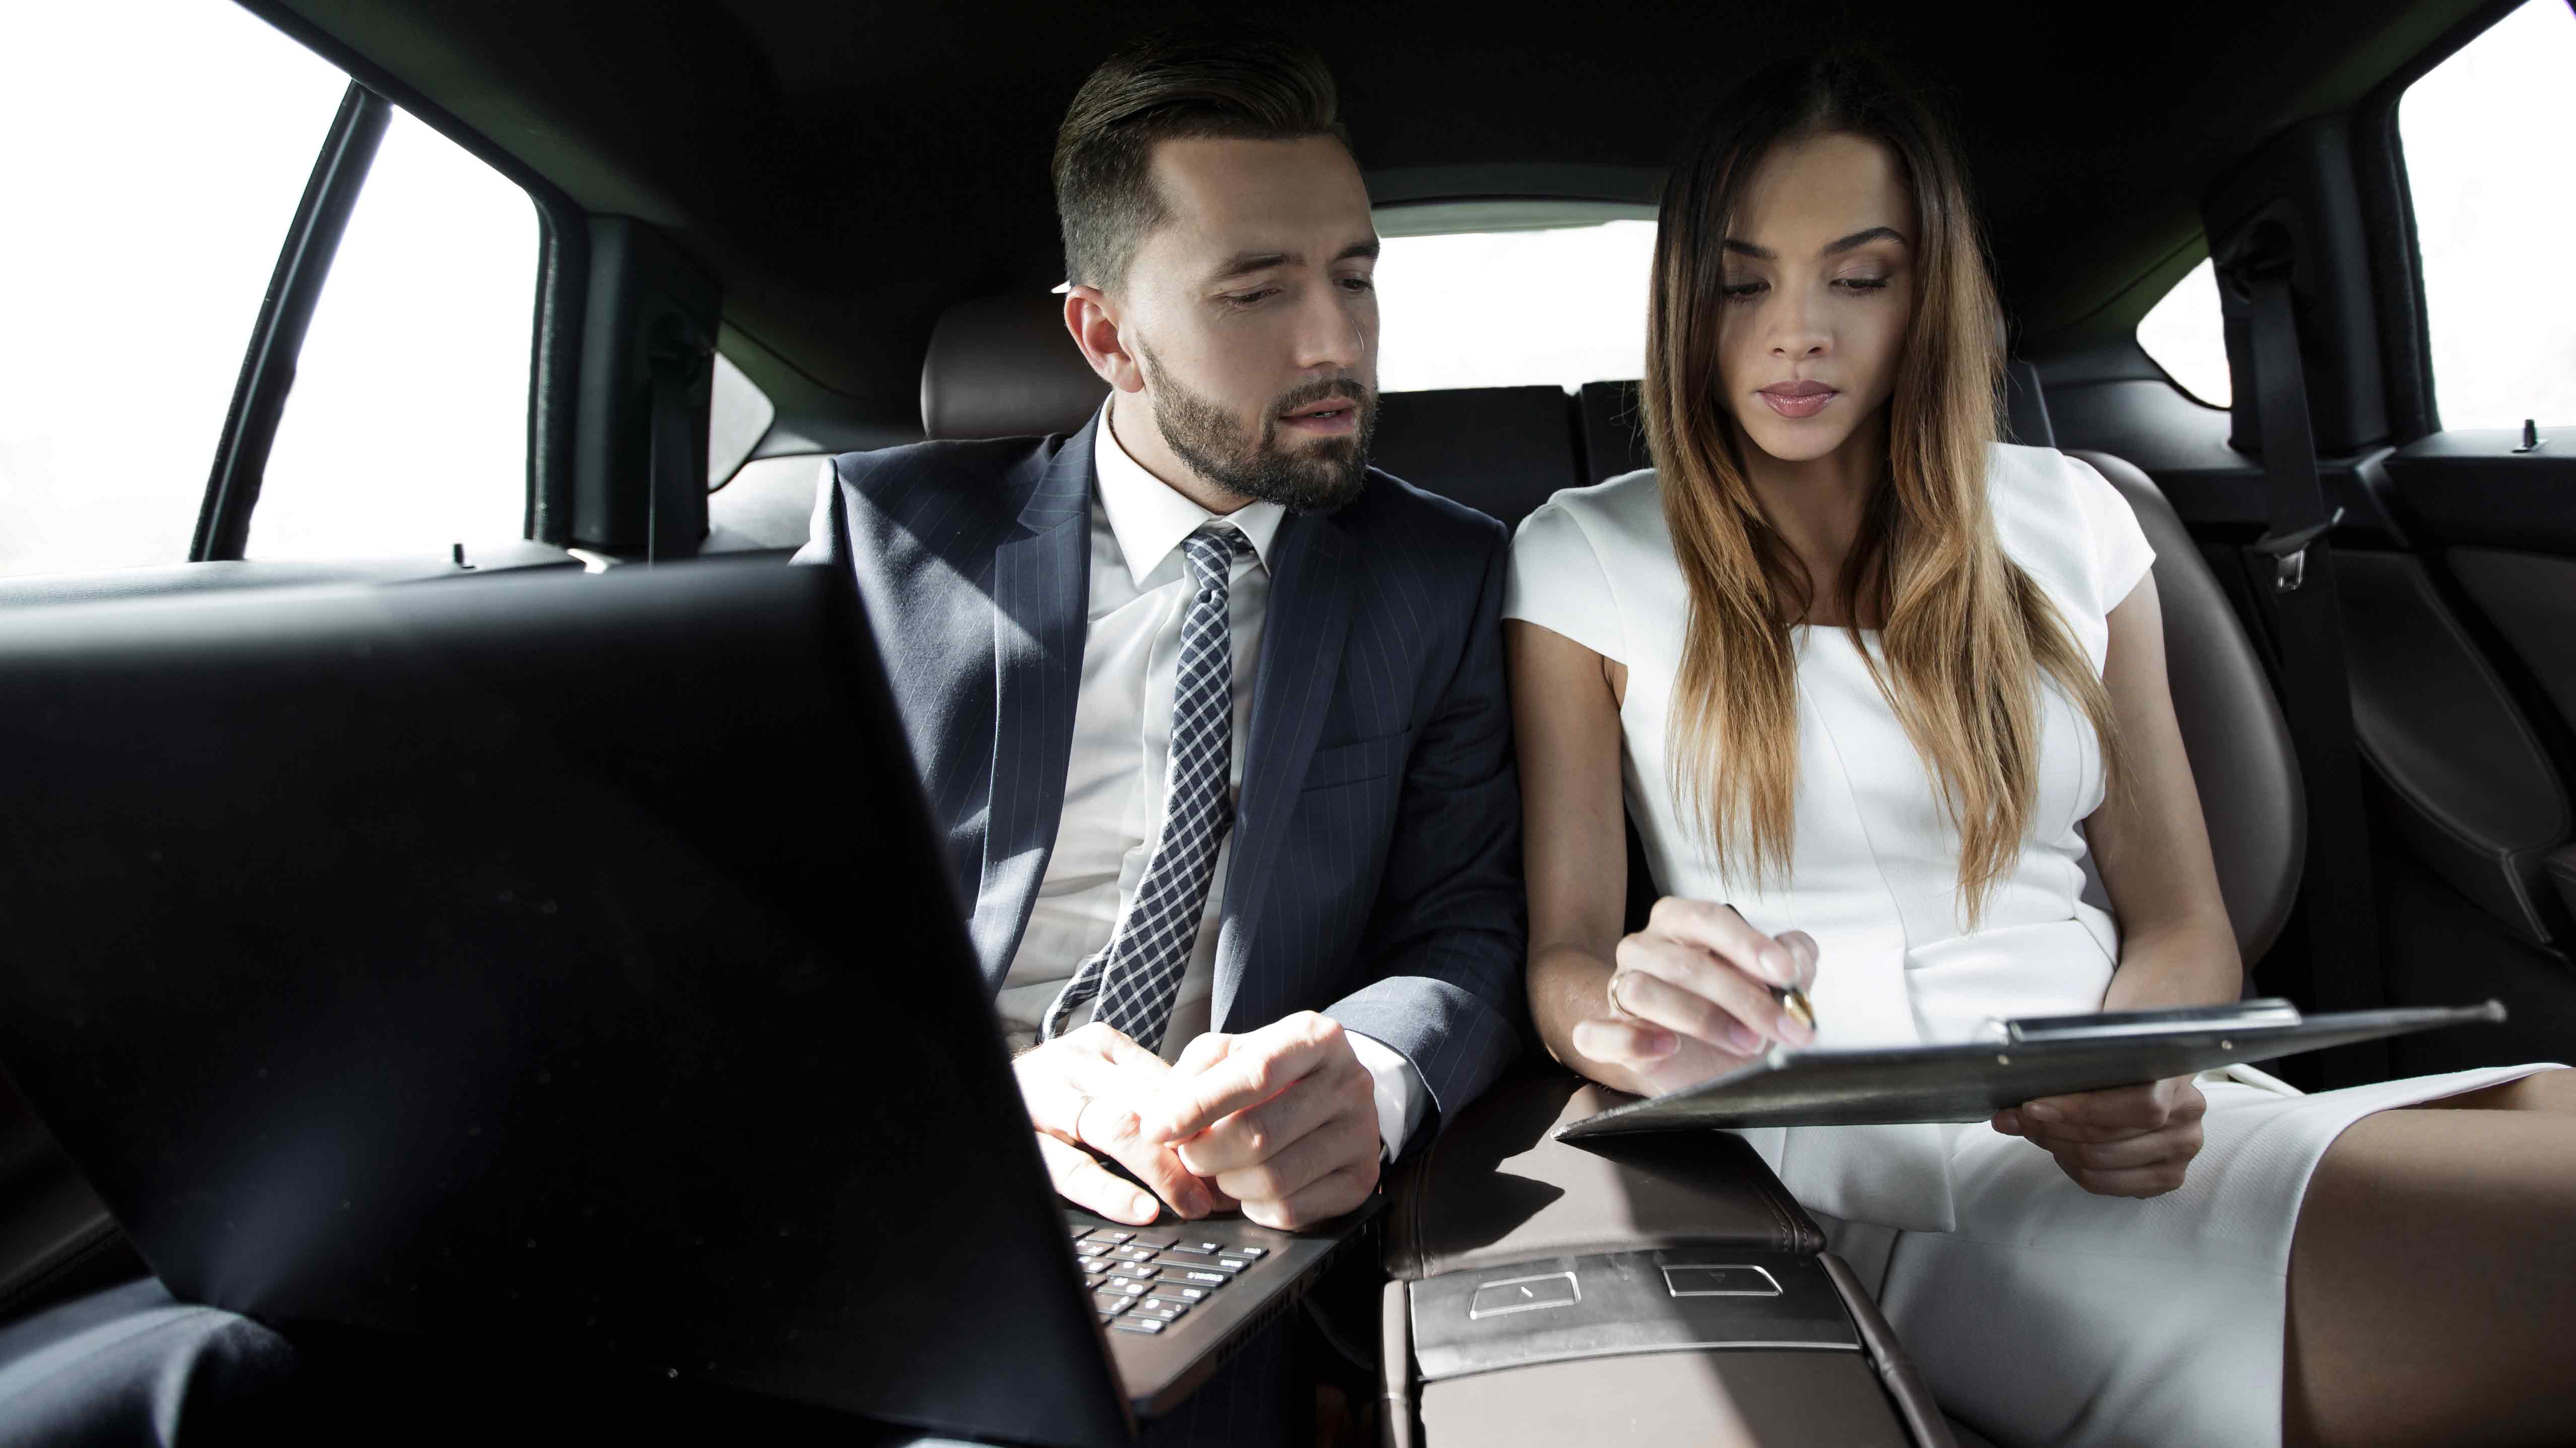 Professional man and woman corporate executives enjoying corporate chauffeur services